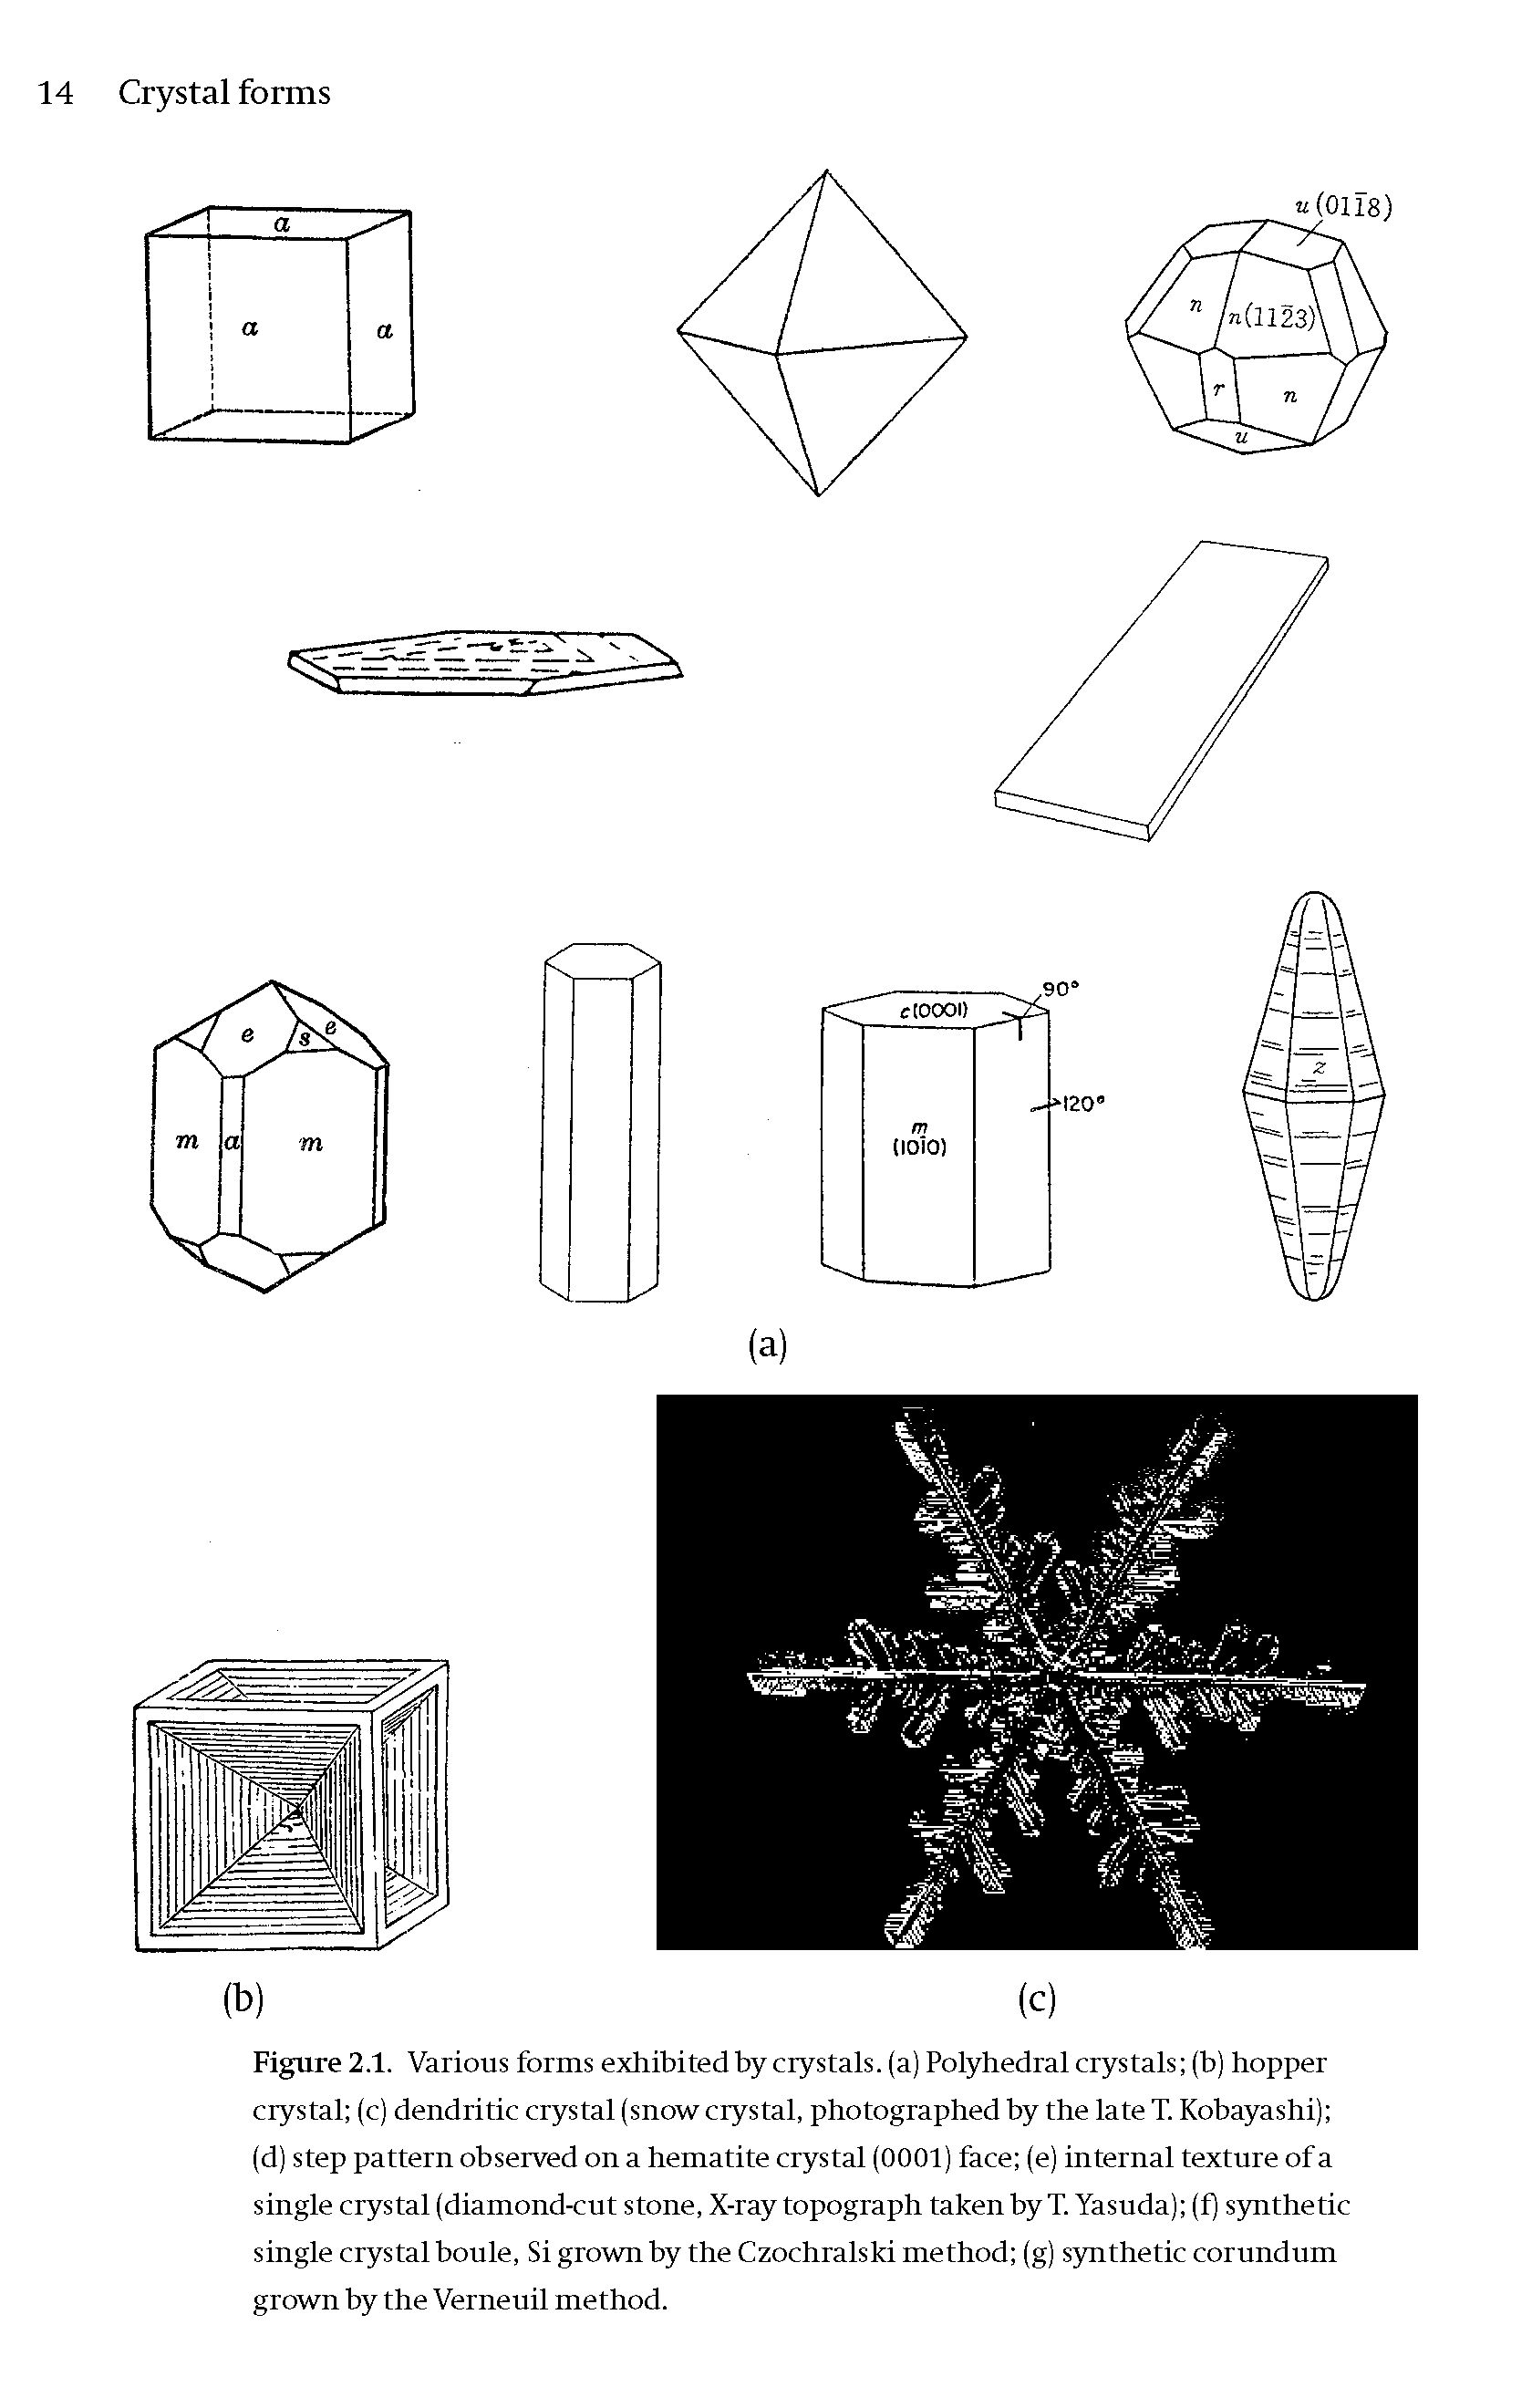 Figure 2.1. Various forms exhibited by crystals, (a) Polyhedral crystals (b) hopper crystal (c) dendritic crystal (snow crystal, photographed by the late T. Kobayashi) (d) step pattern observed on a hematite crystal (0001) face (e) internal texture of a single crystal (diamond-cut stone, X-ray topograph taken by T.Yasuda) (f) synthetic single crystal boule. Si grown by the Czochralski method (g) synthetic corundum grown by the Verneuil method.